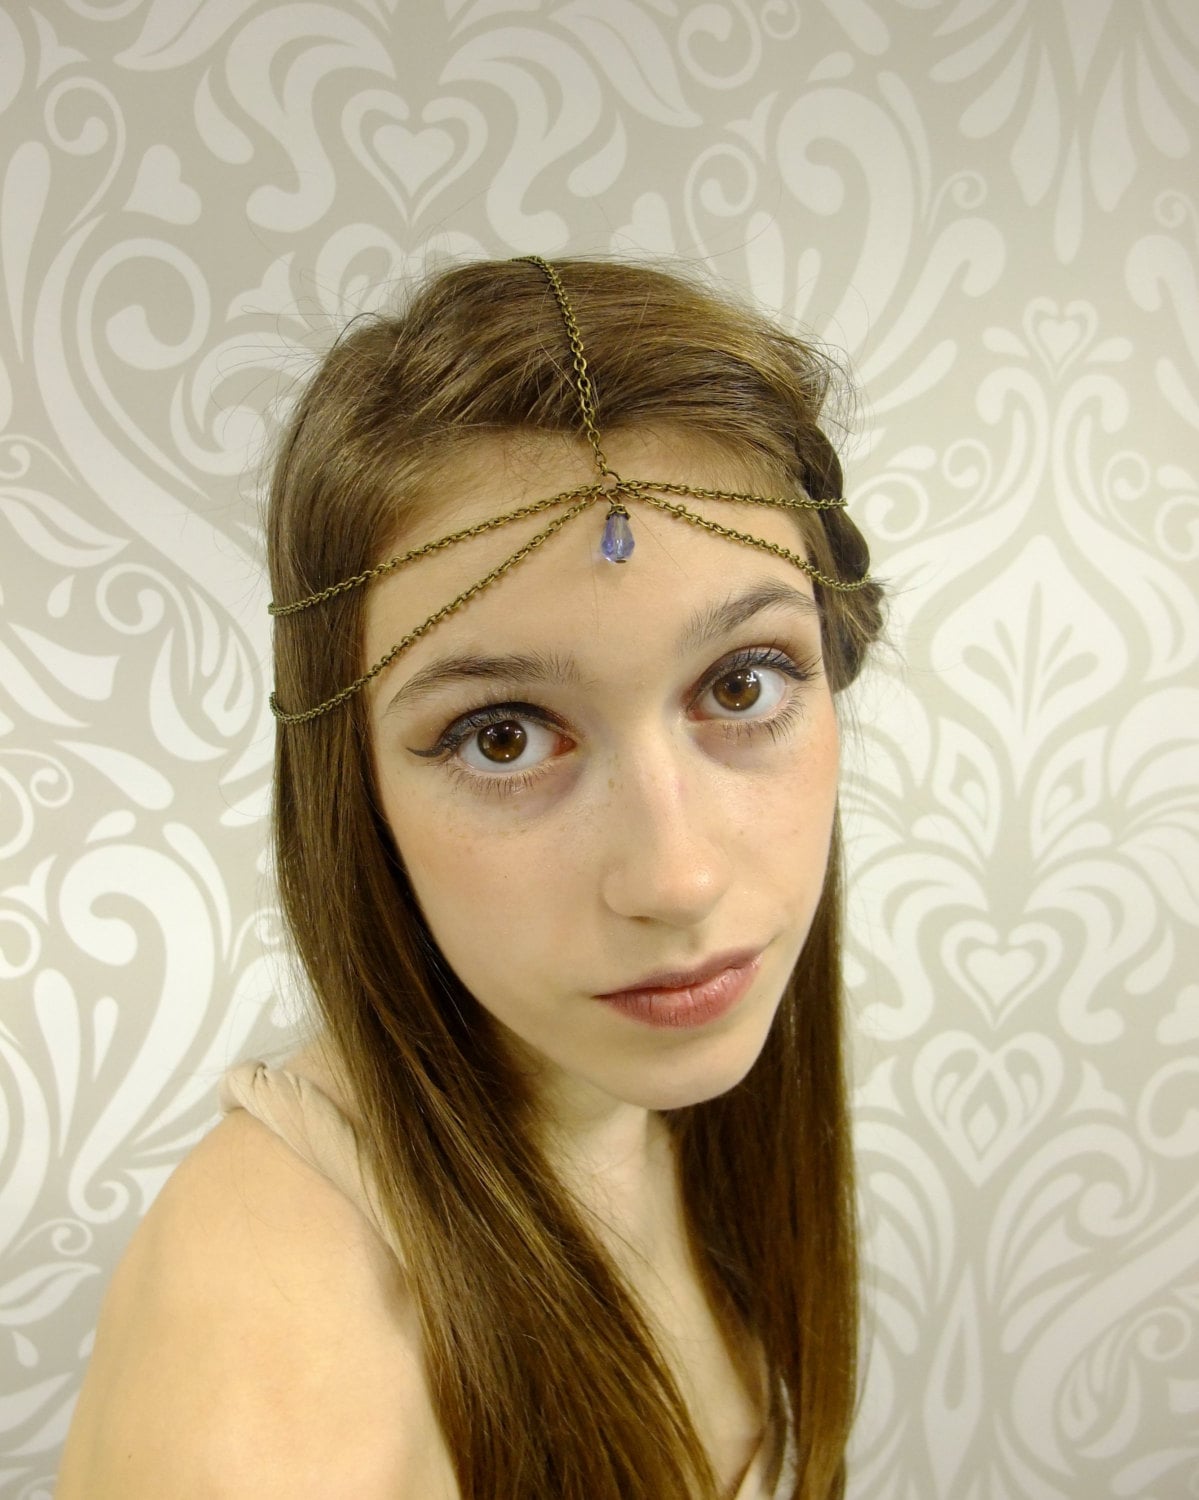 Antiqued Brass and Periwinkle Headchain Free USA Shipping - Etsy